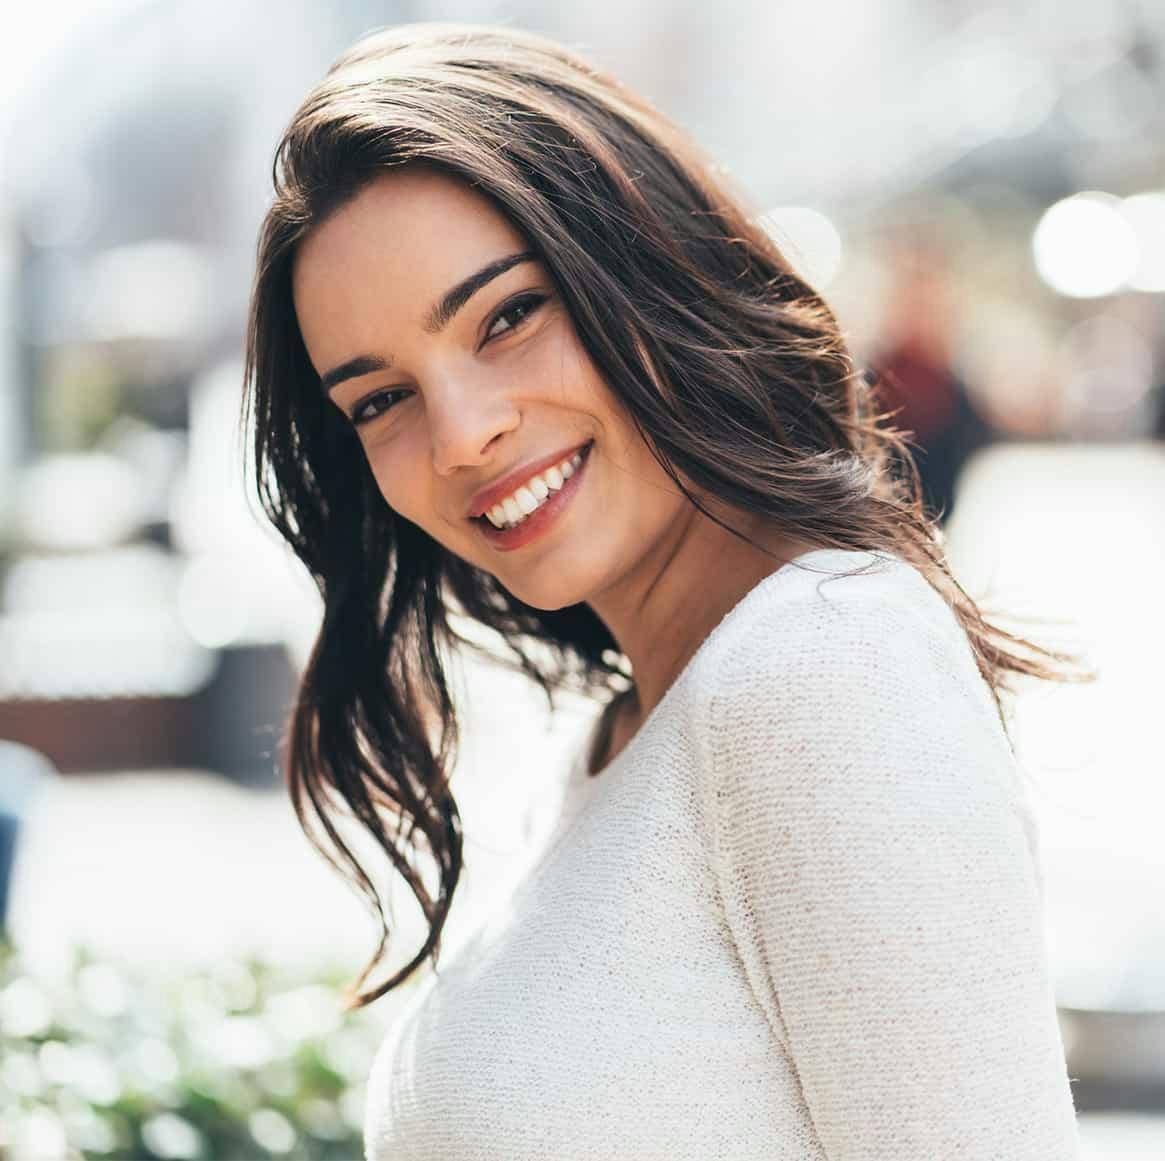 woman with brown hair smiling